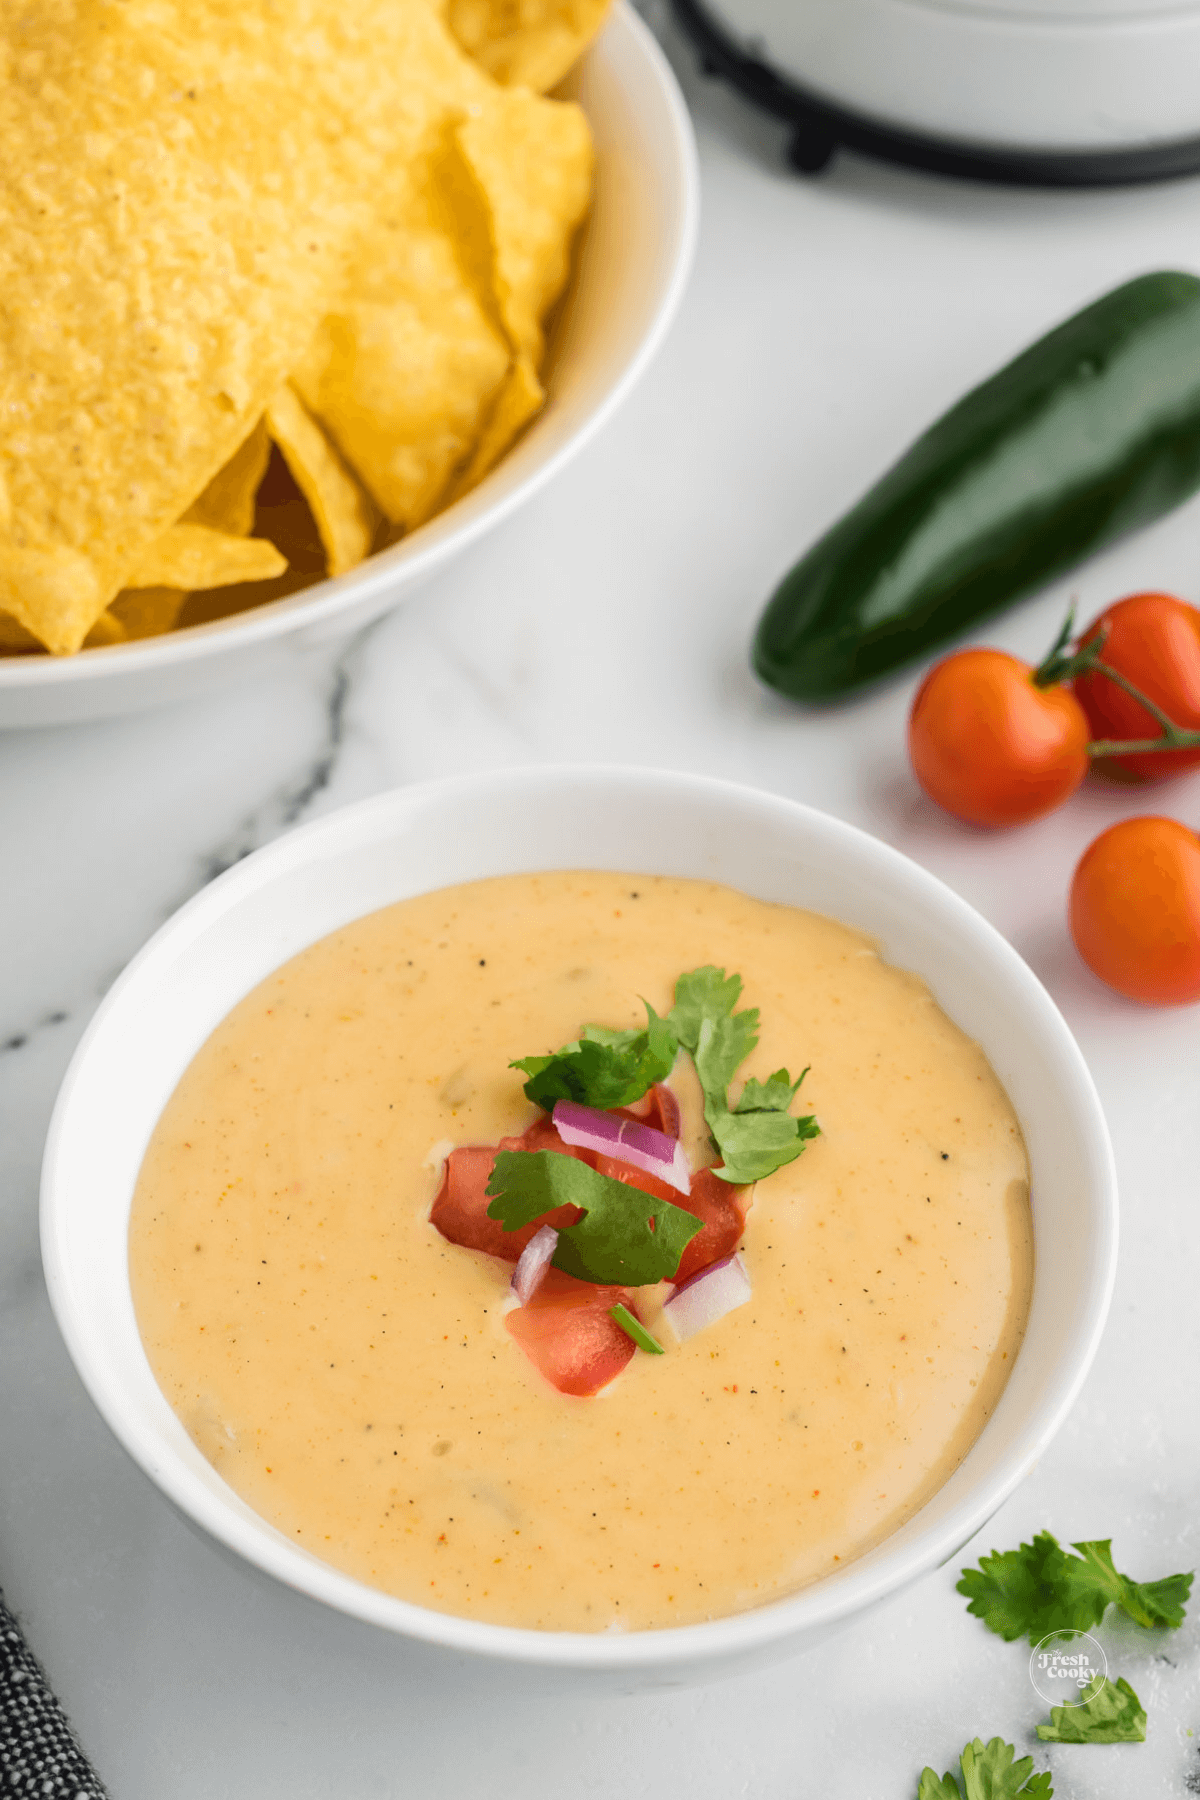 Bowl of creamy all natural queso dip with tortilla chips and garnish.